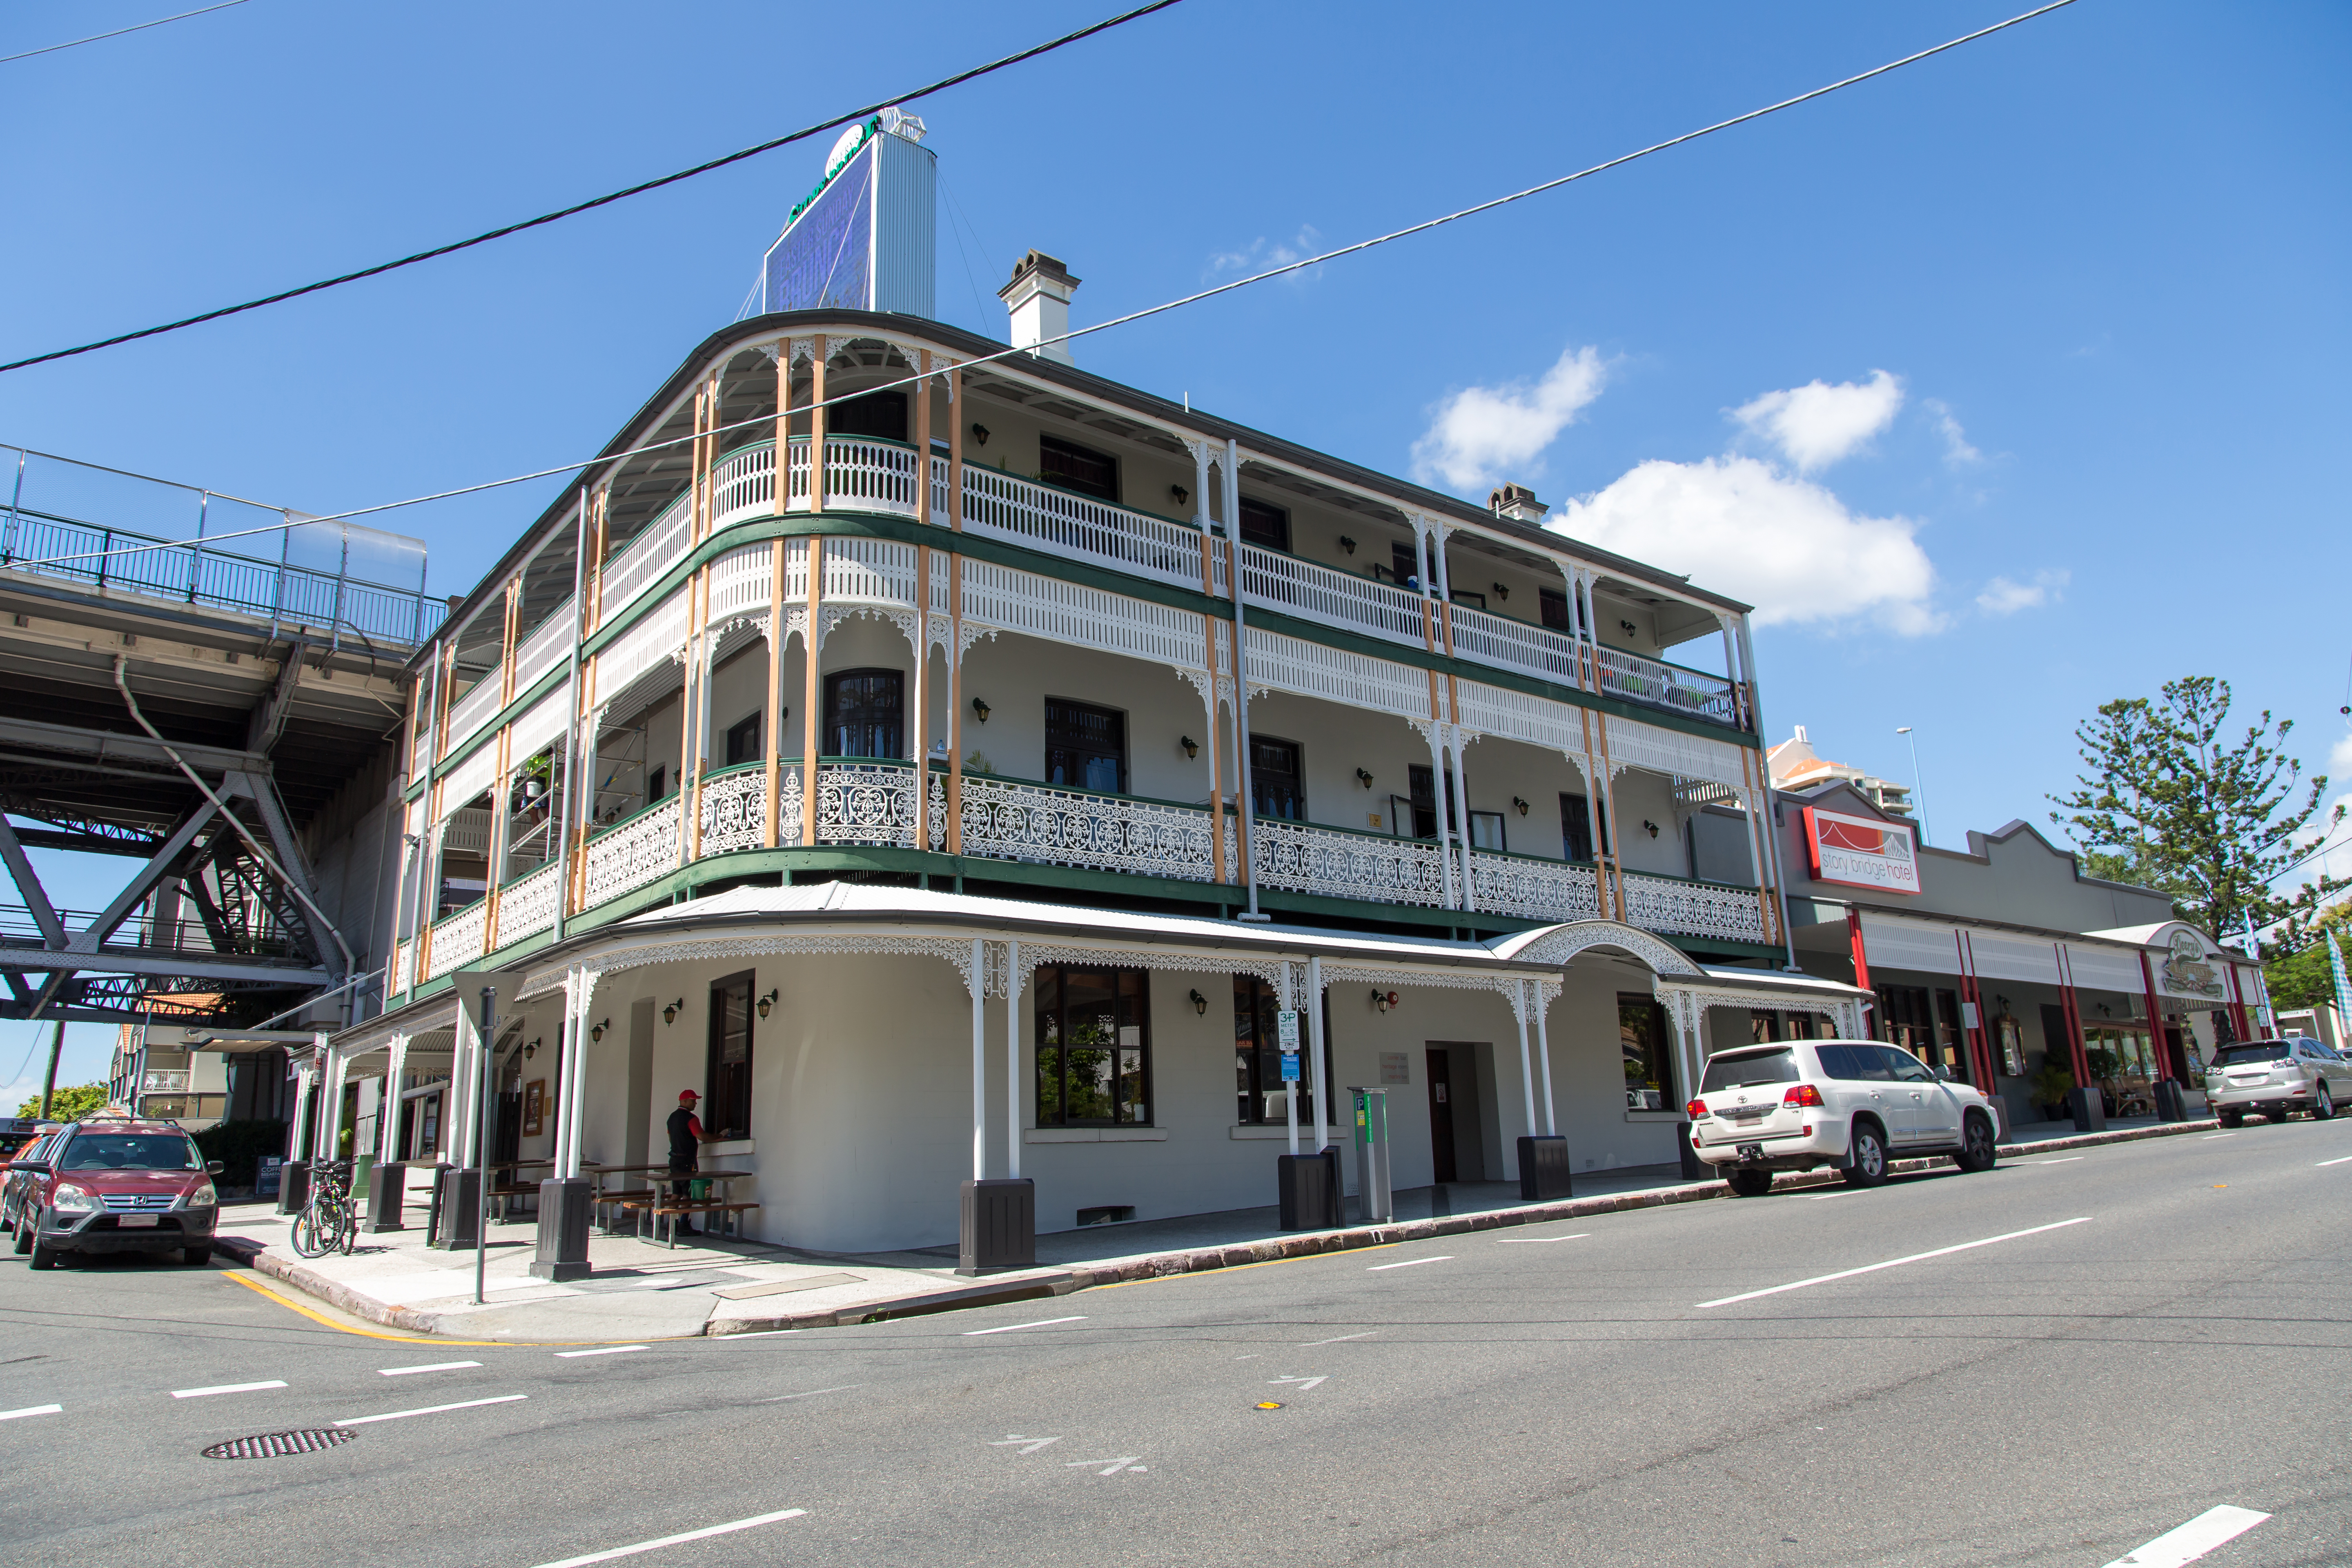 This is an image of the Main street elevation of the Story Bridge Hotel